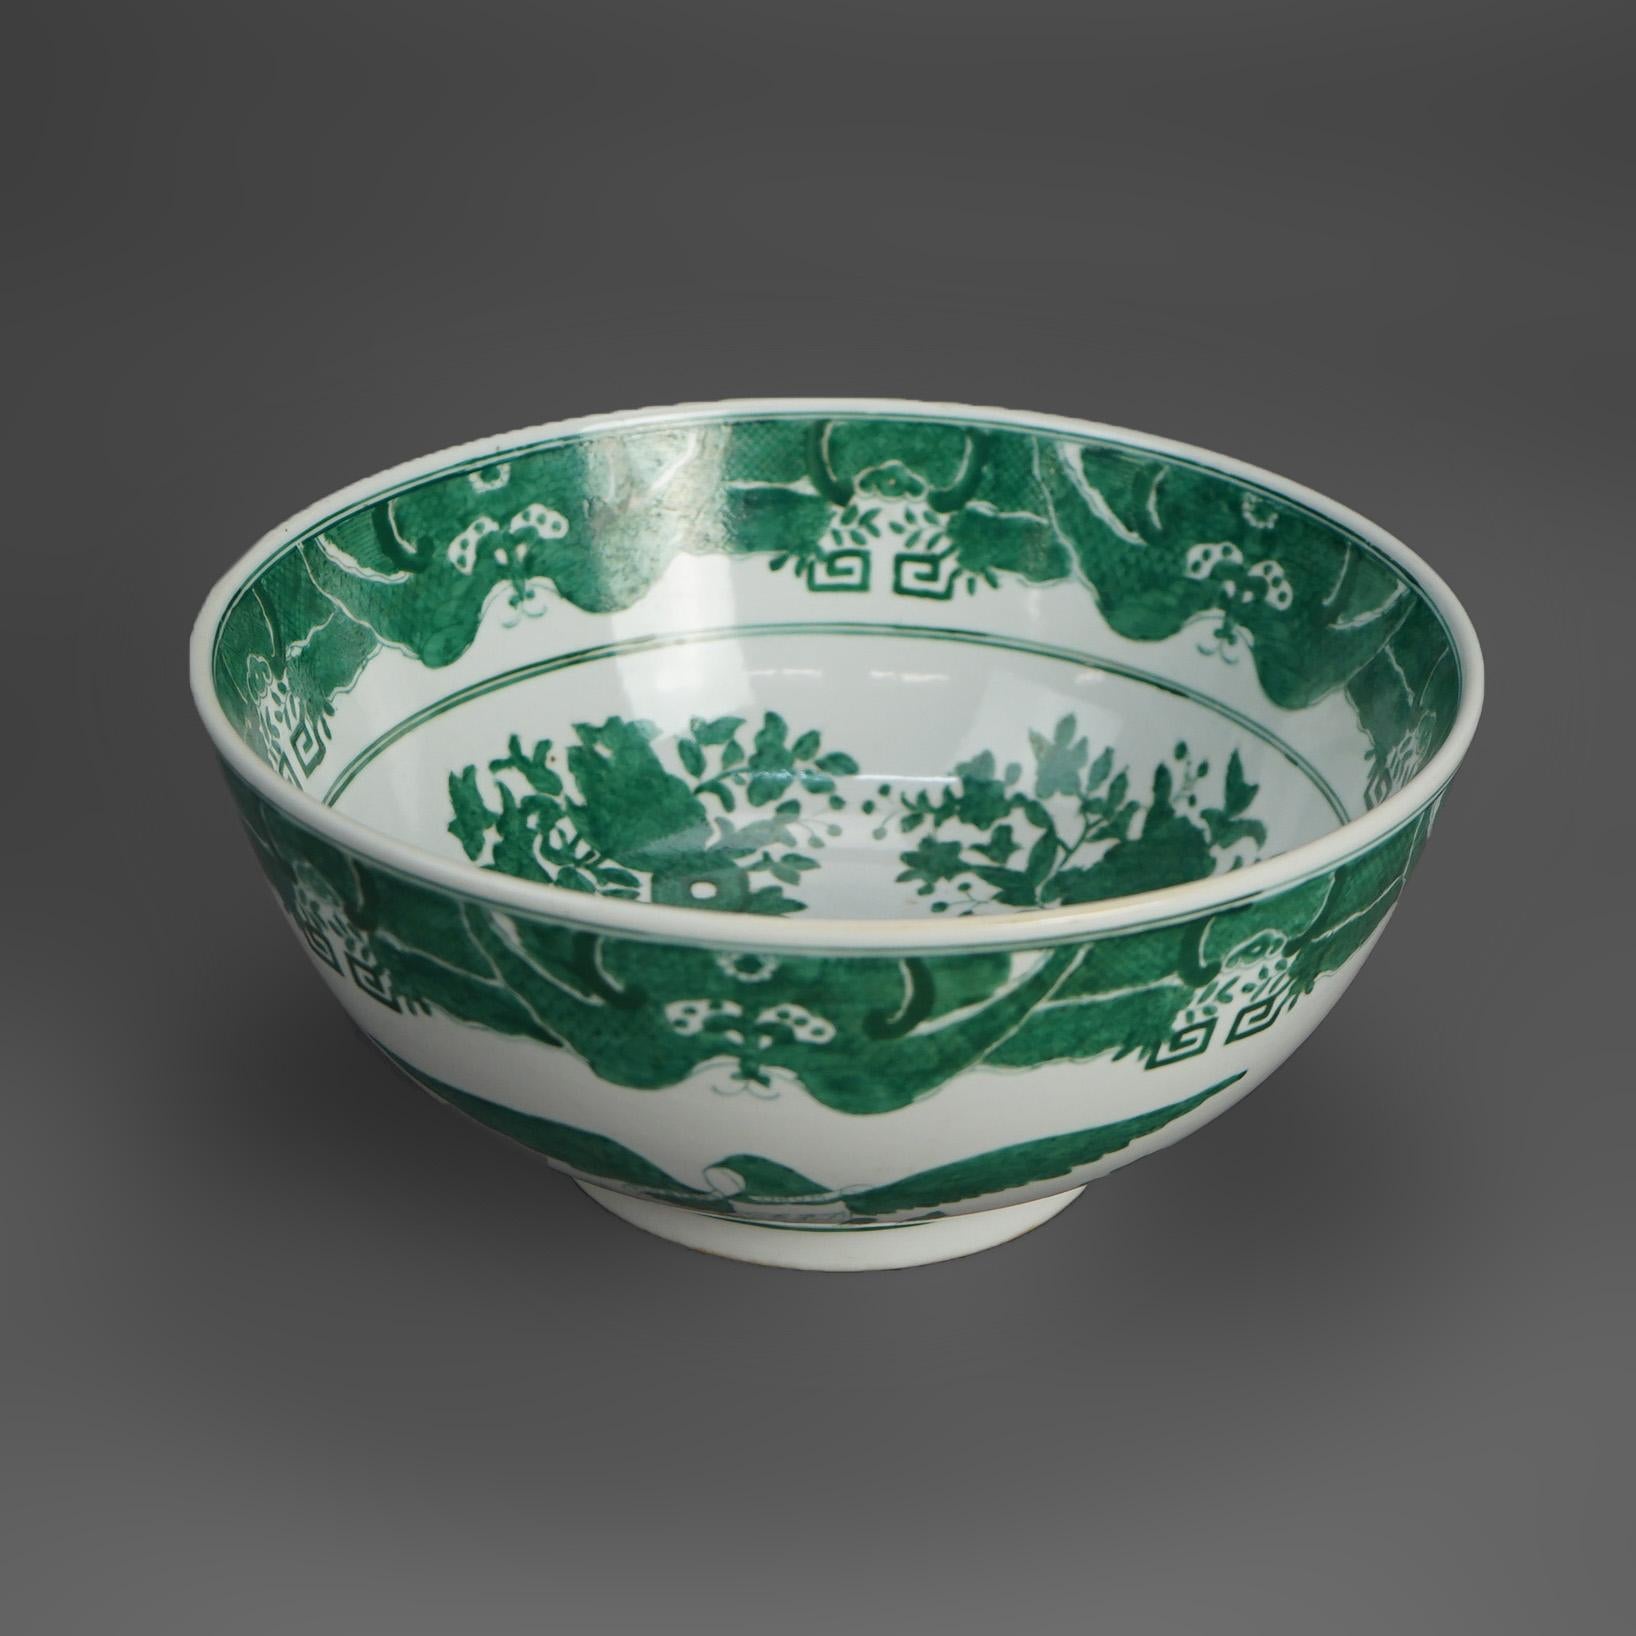 Chinese Export Porcelain Bowl with Eagle Design 20thC In Good Condition For Sale In Big Flats, NY